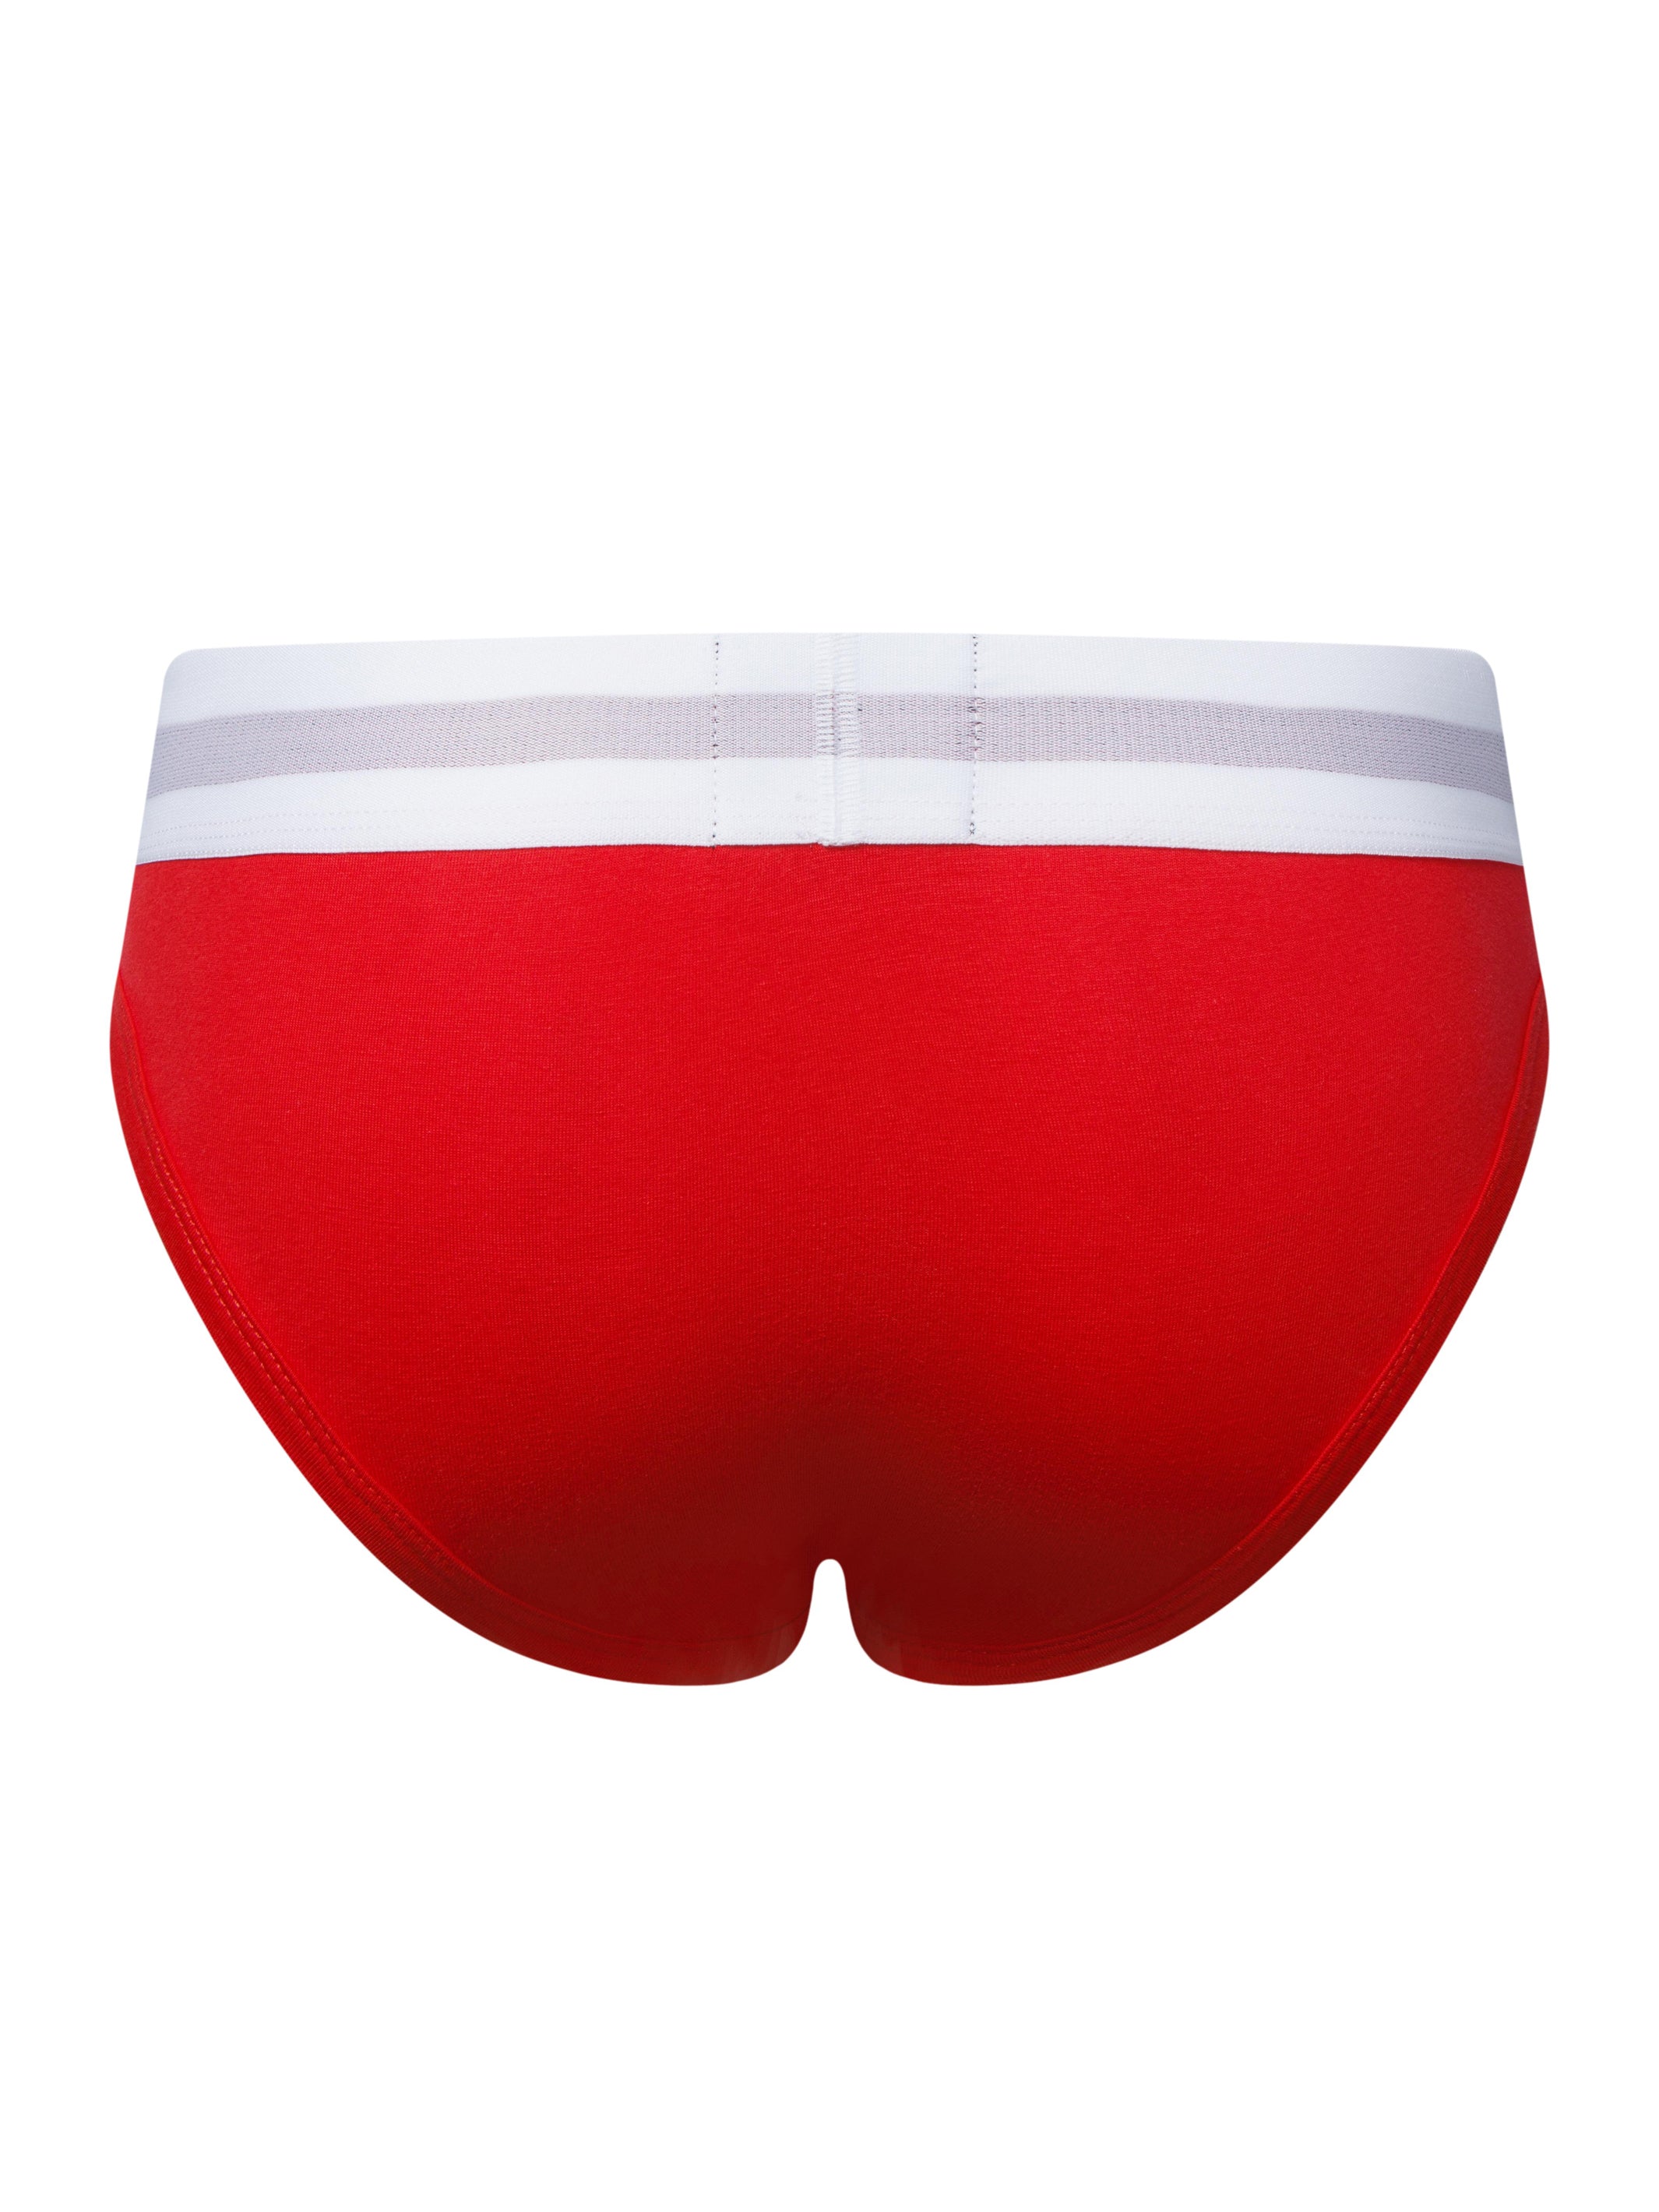 The back of a pair of red Insignia Briefs.